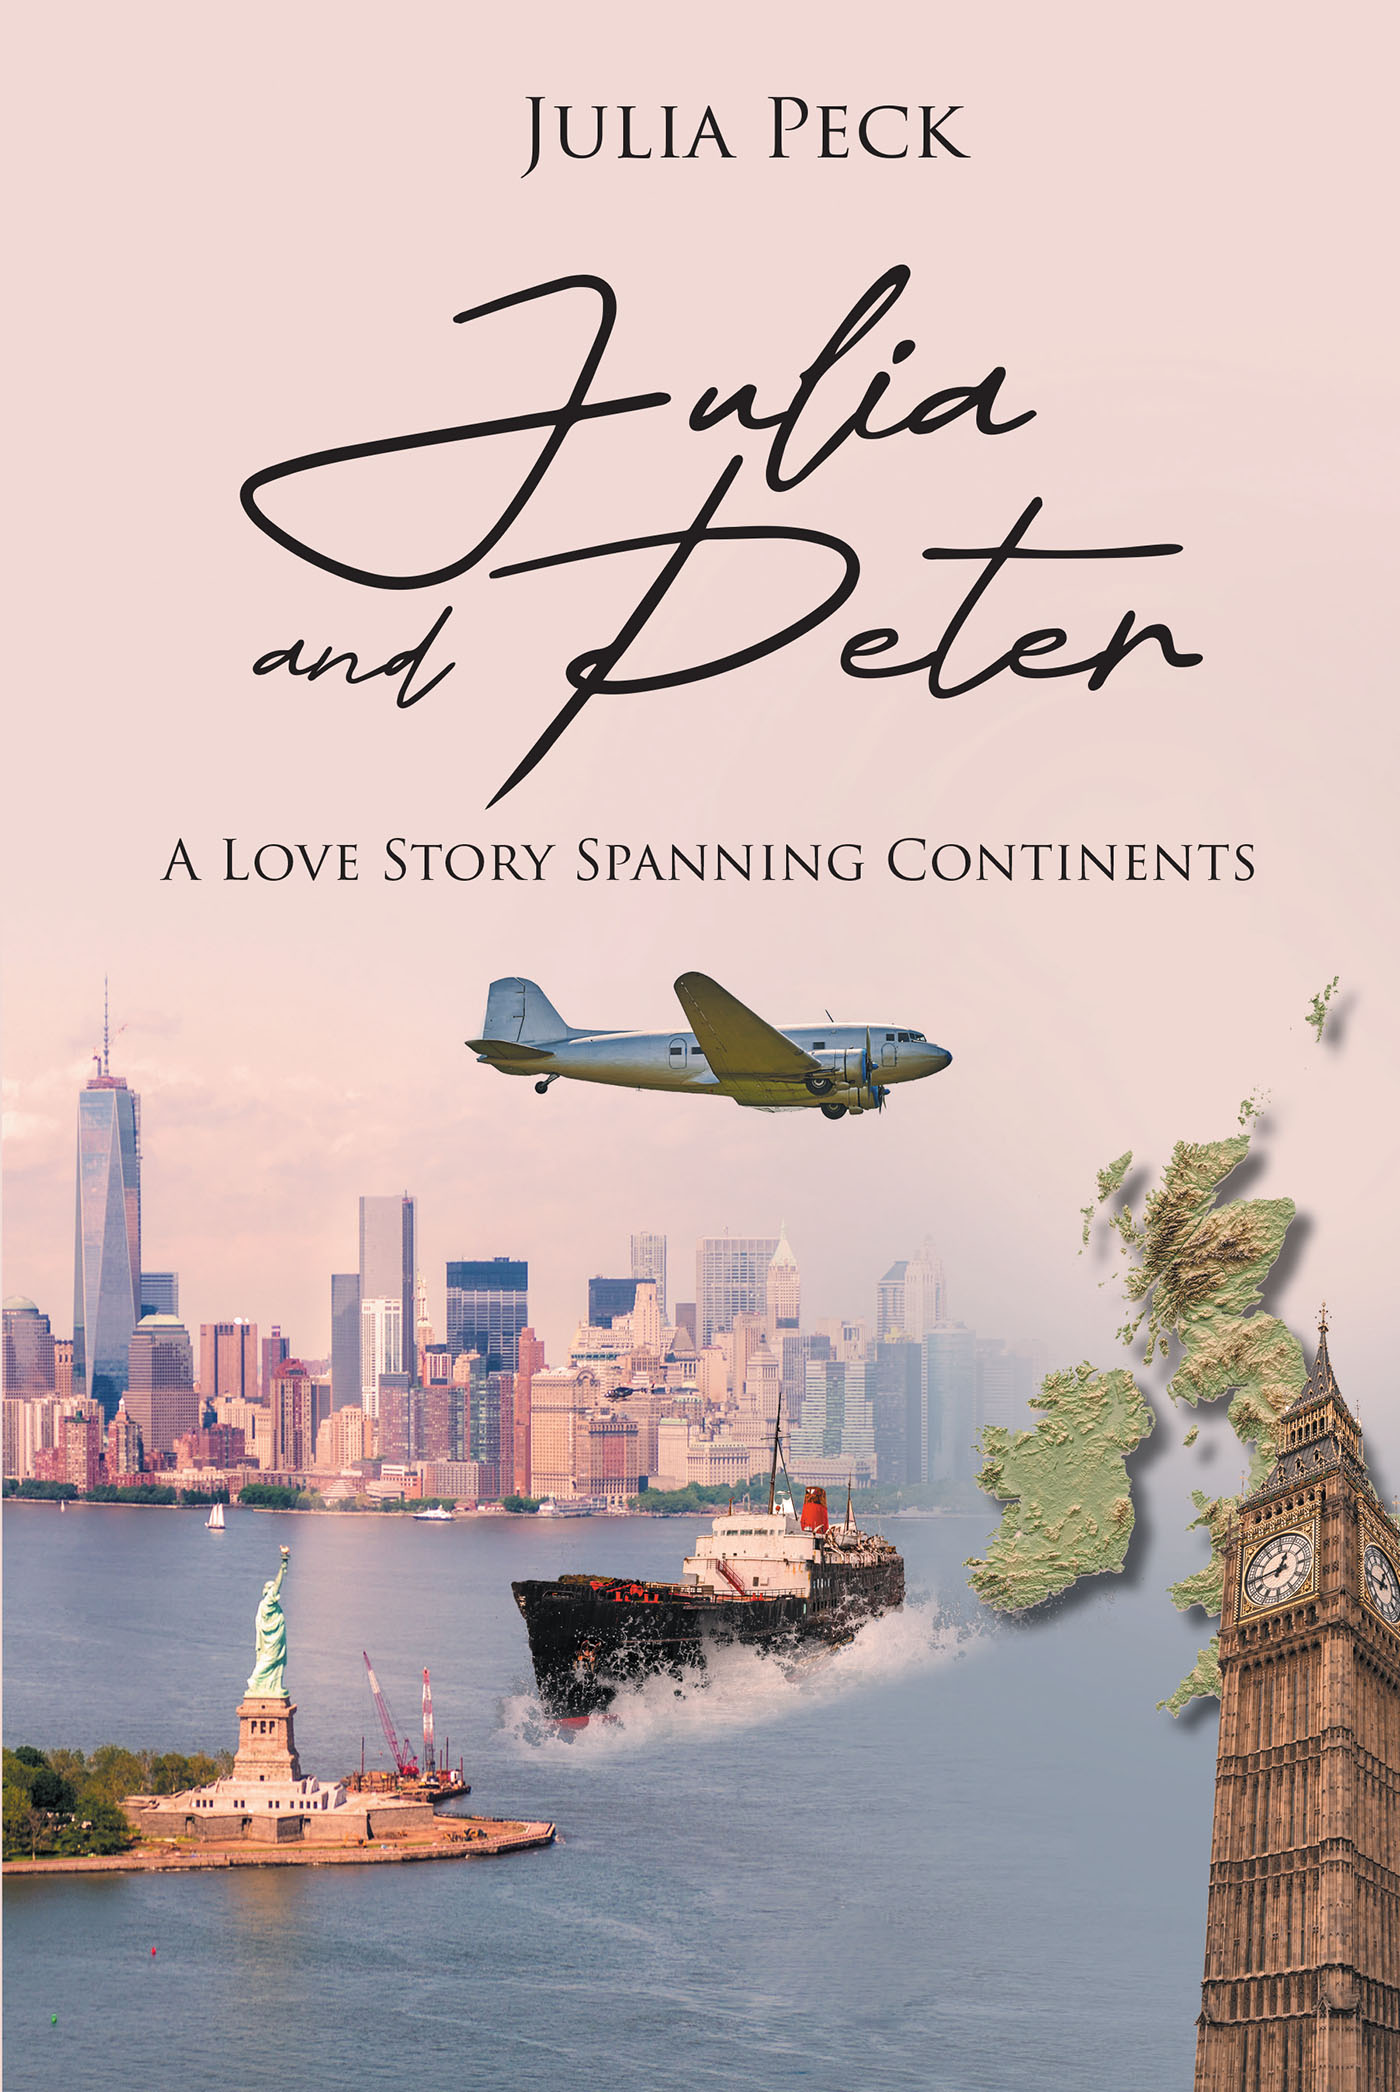 Author Julia Peck’s New Book, "Julia and Peter," is the Love Story of the Author and Her Late Husband